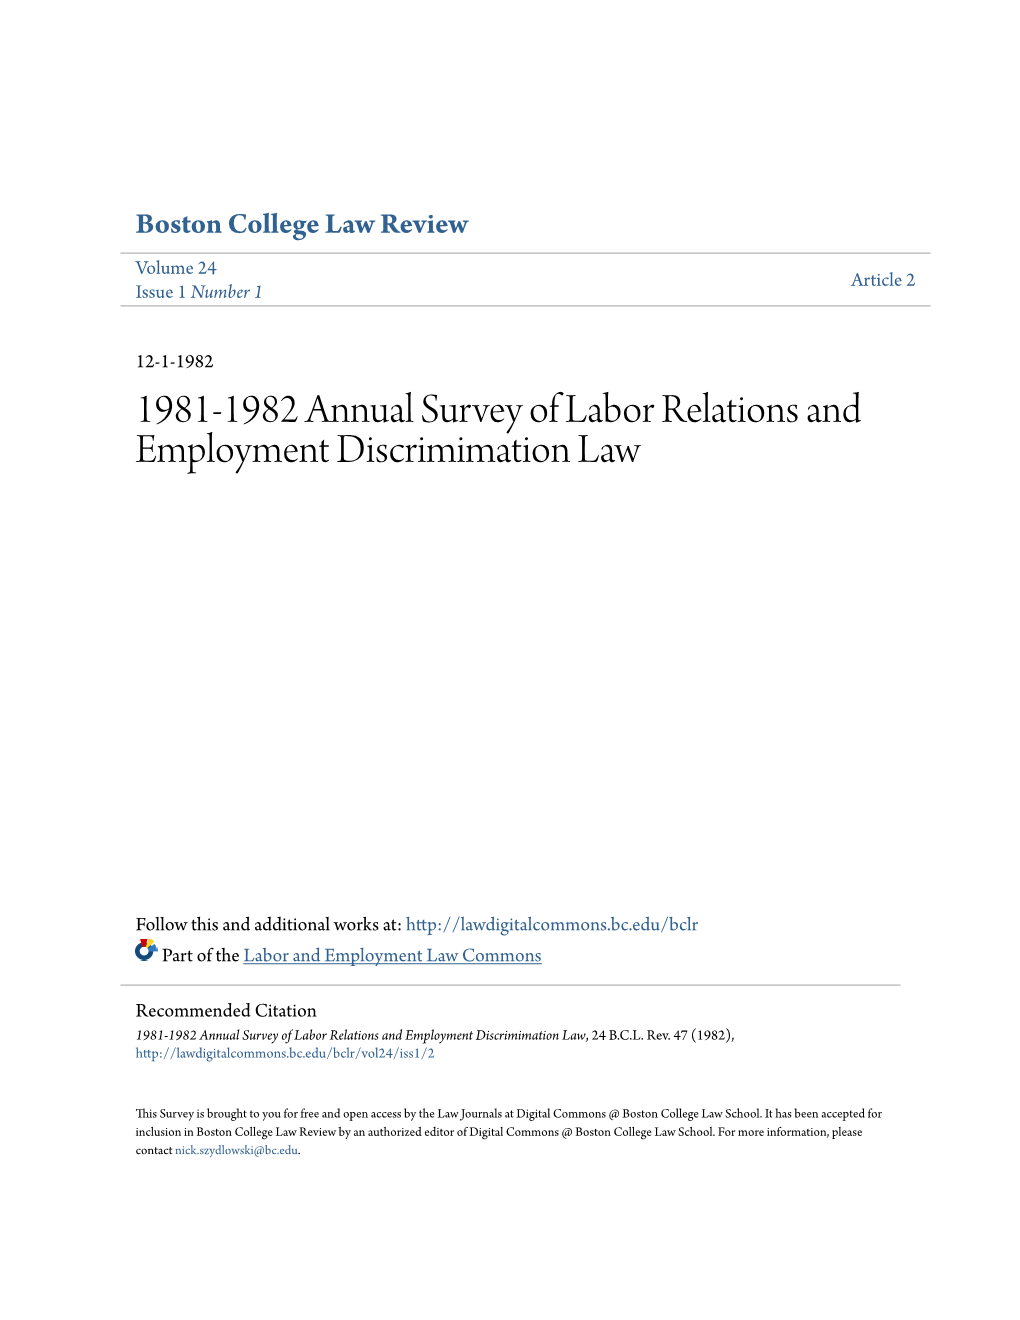 1981-1982 Annual Survey of Labor Relations and Employment Discrimimation Law